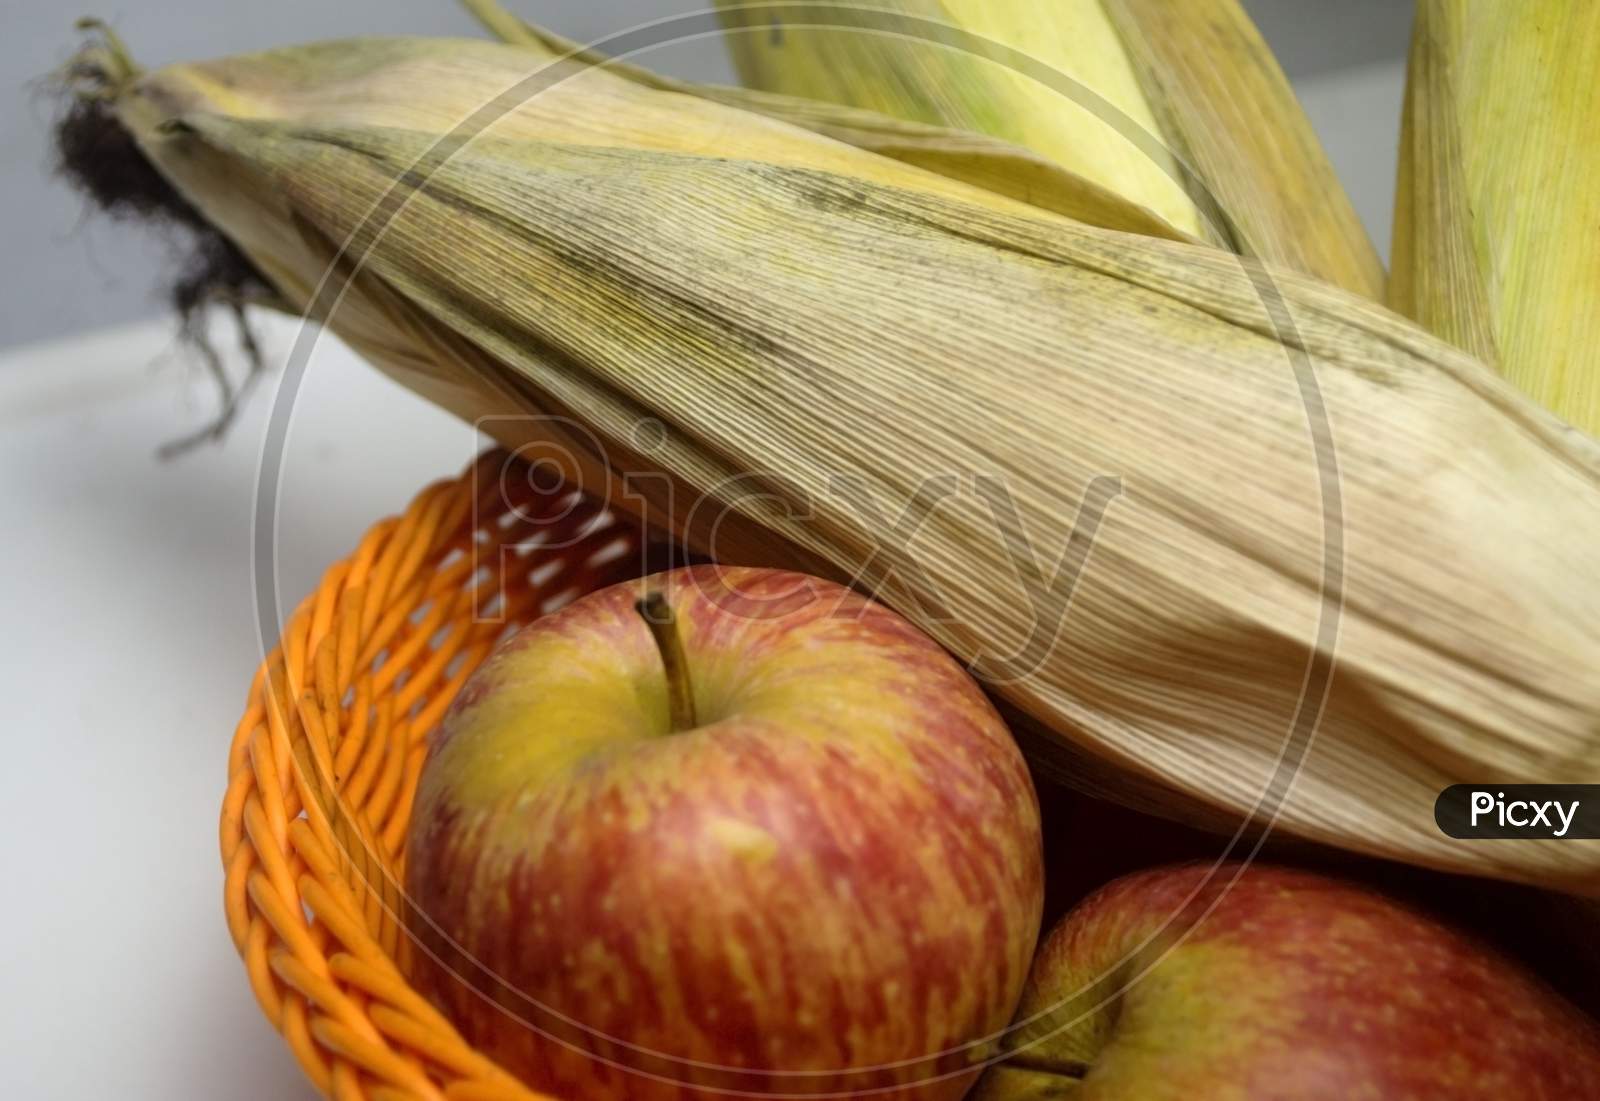 Apple And Leafed Corn On A Blurred Isolated Background